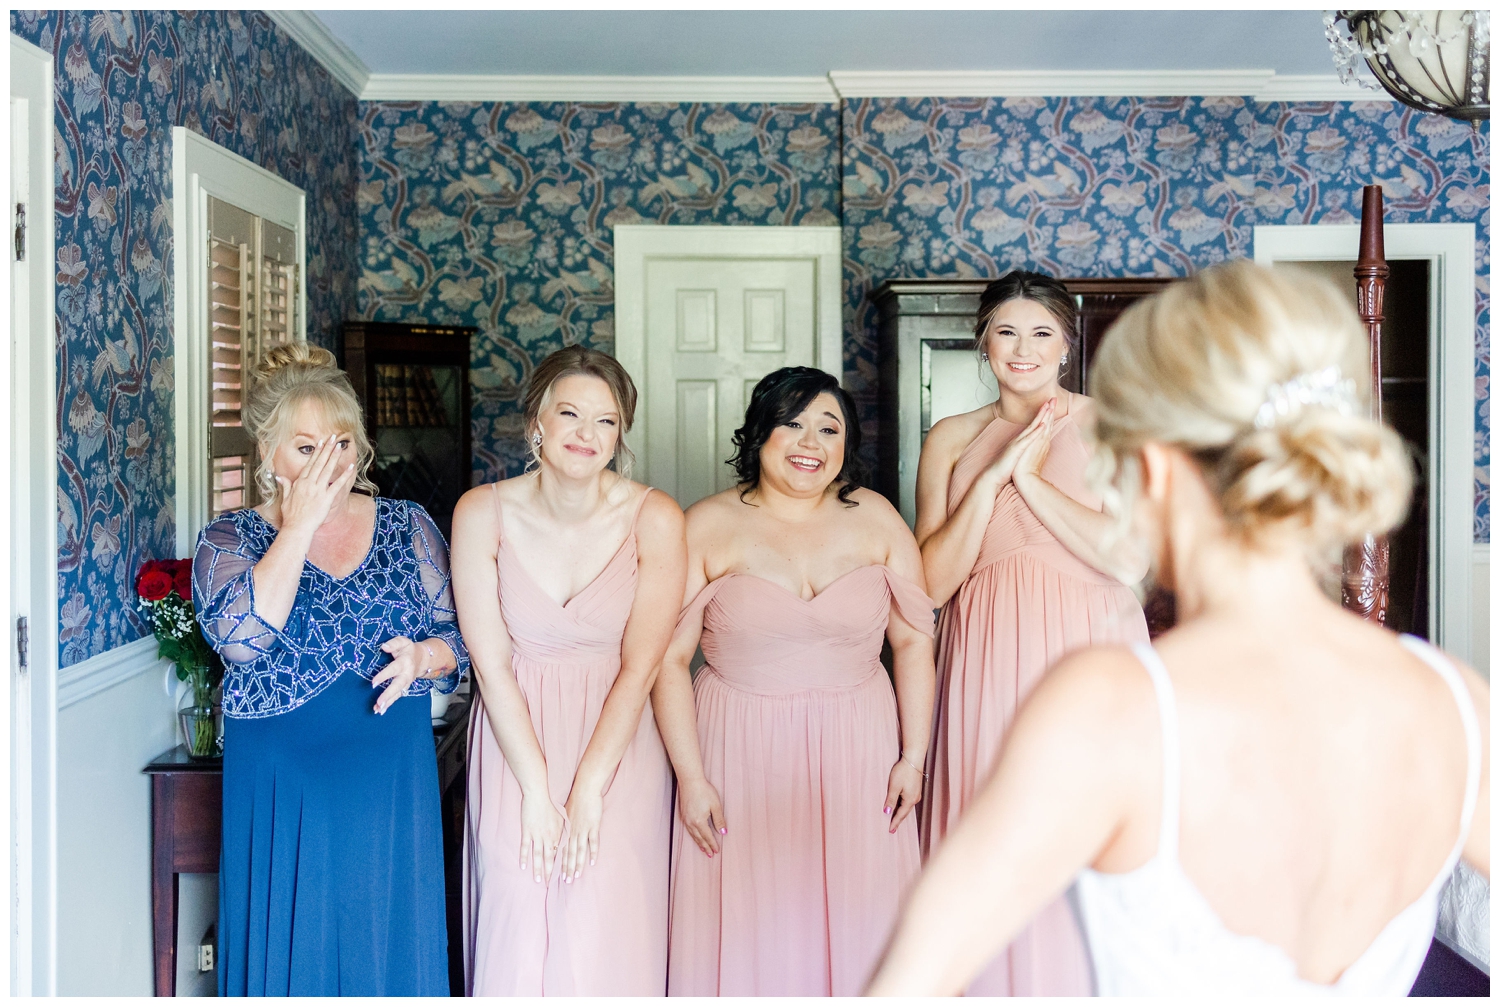 bridesmaids seeing bride for first time in wedding gown